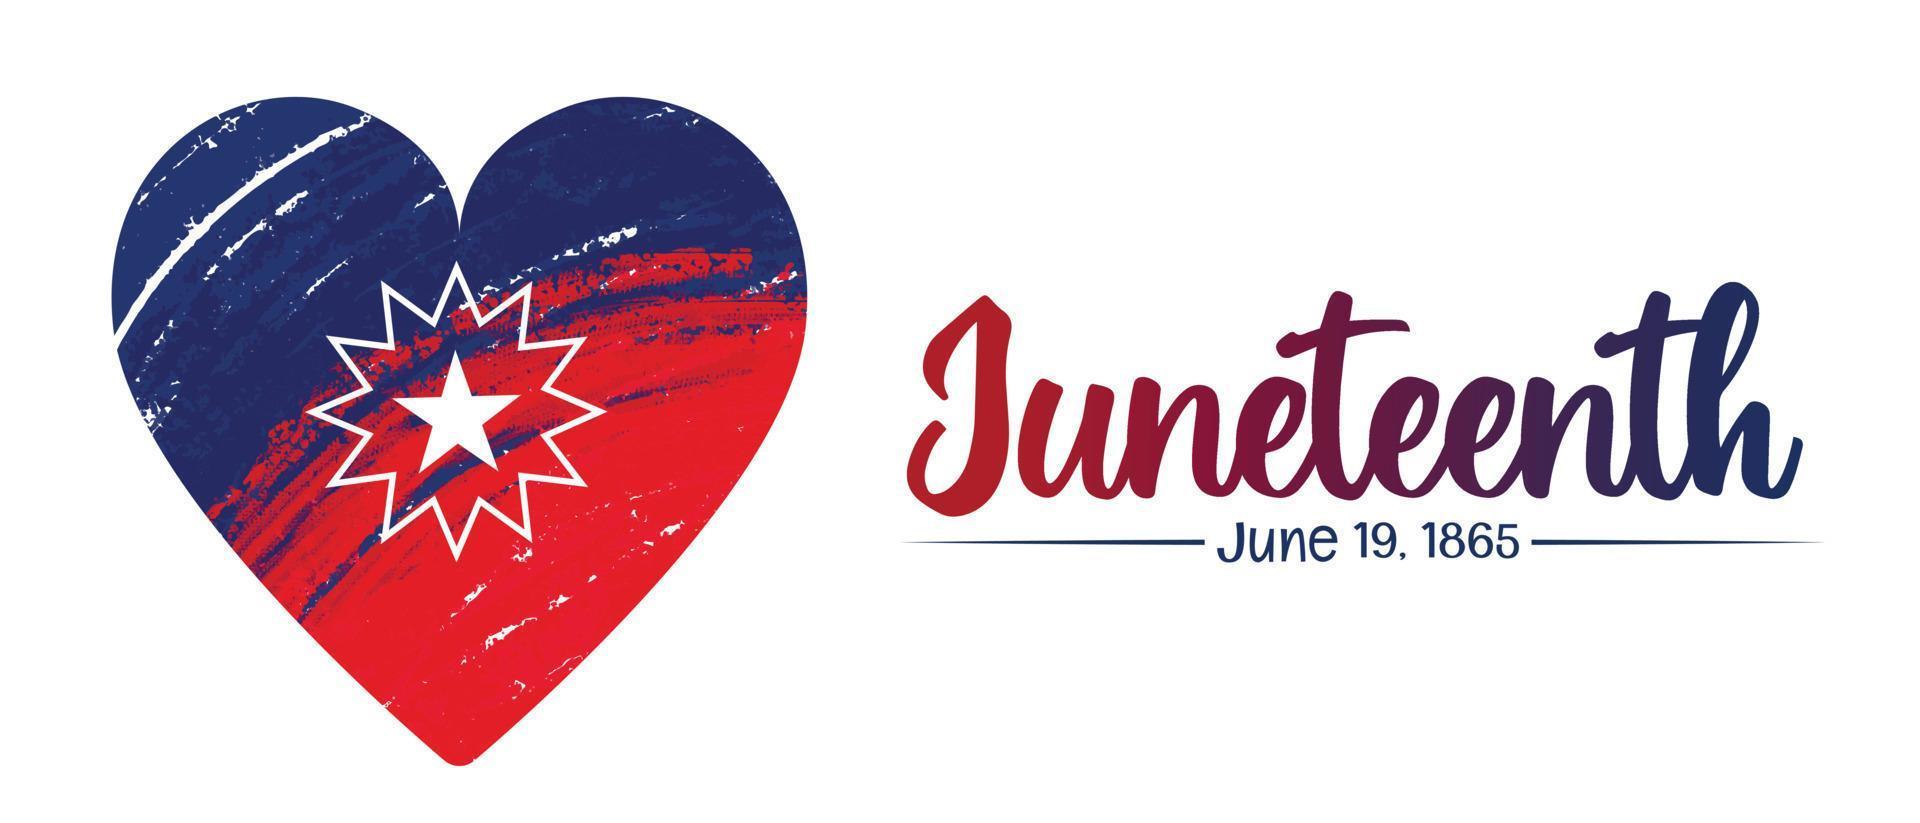 Paint textured artistic vector illustration of Juneteenth flag - white star on red blue brush strokes. Juneteenth banner - African American freedom day celebration